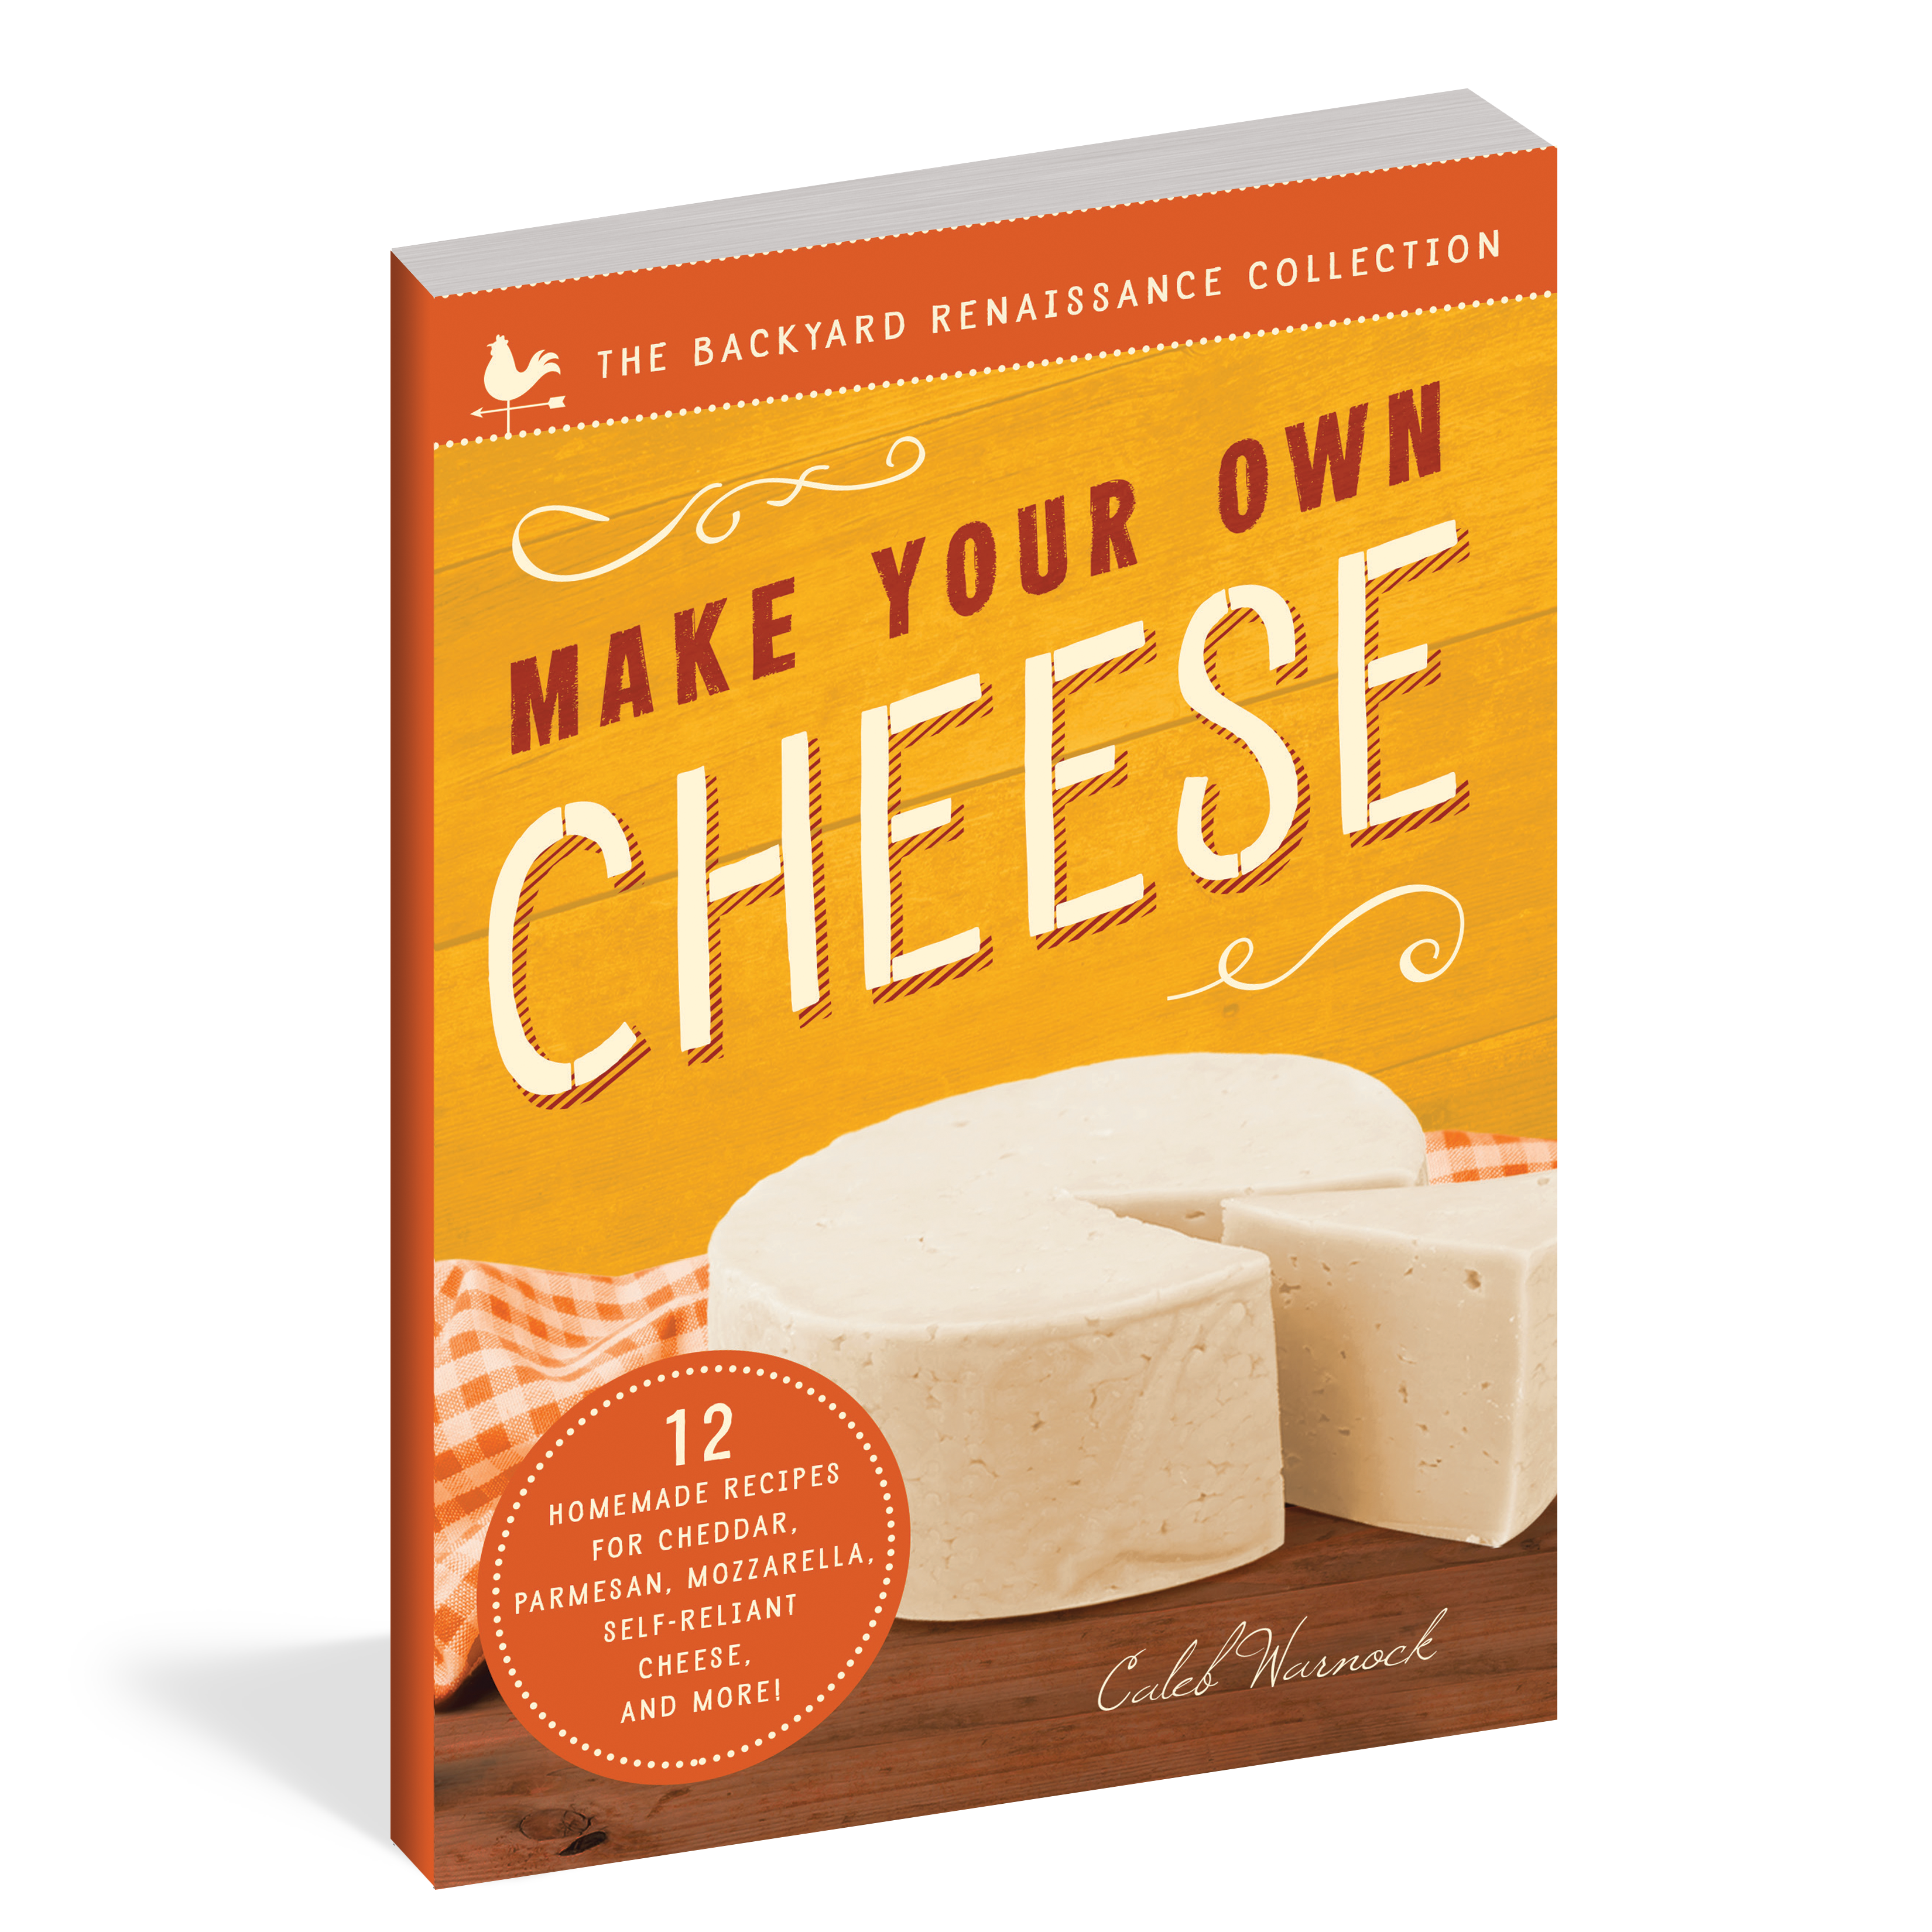 The cover of the book Make Your Own Cheese.